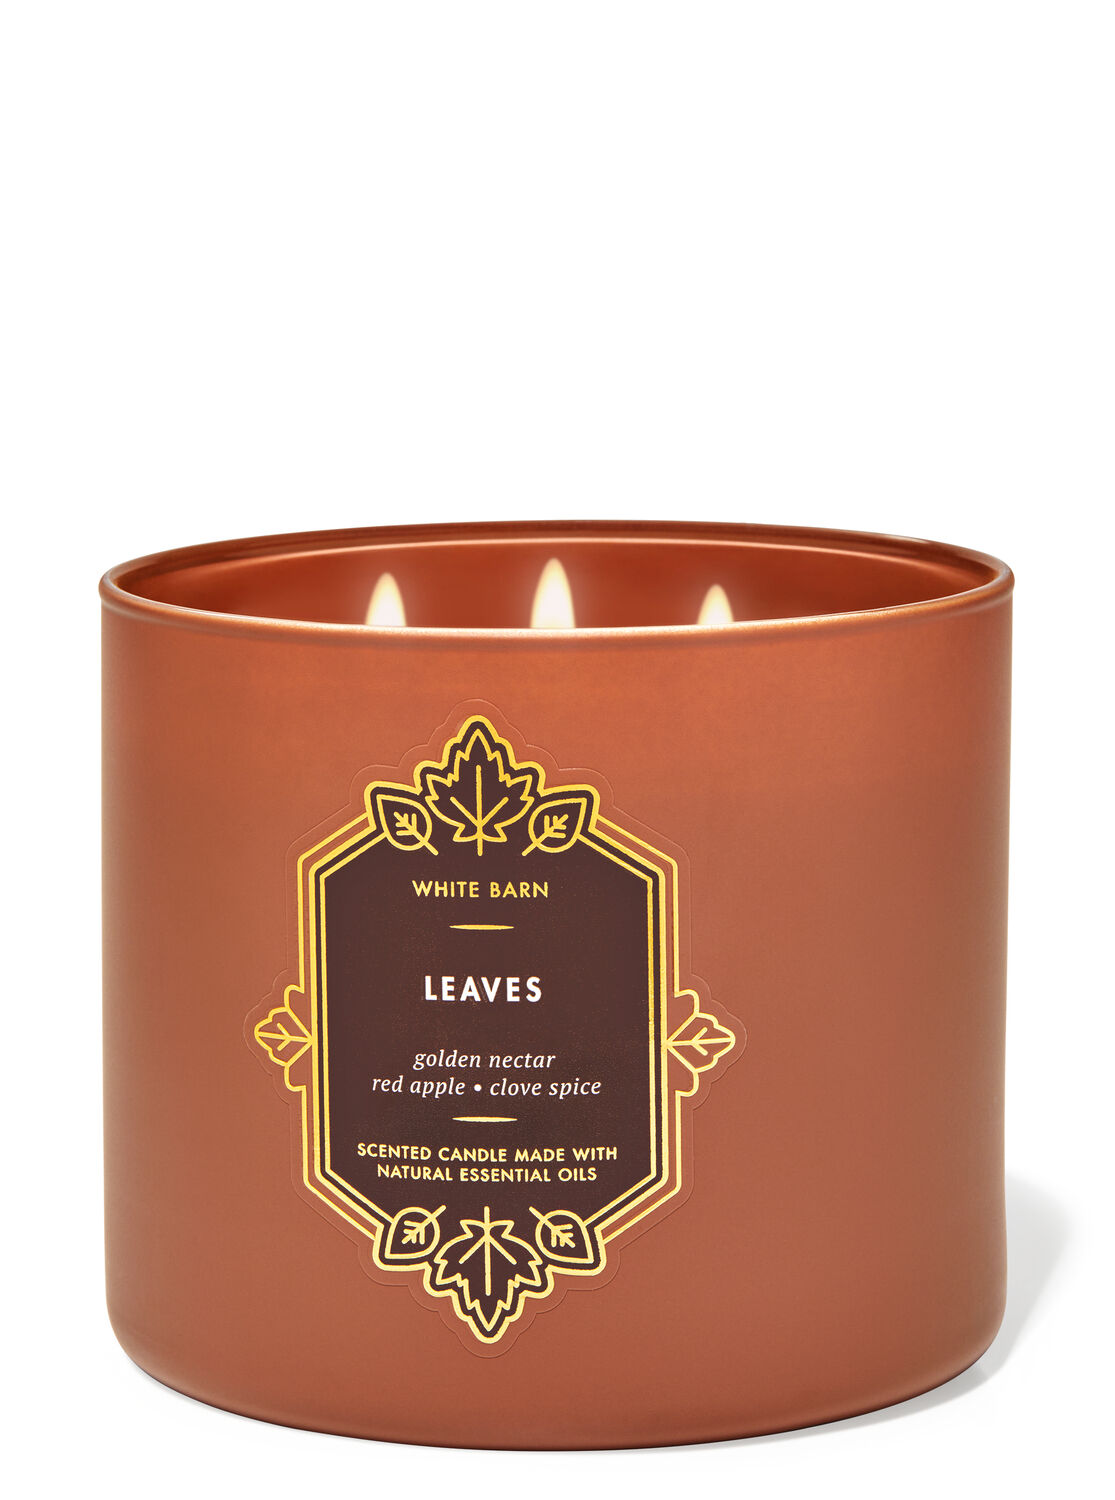 1 Bath & Body Works LEAVES 3-Wick Candle Large 